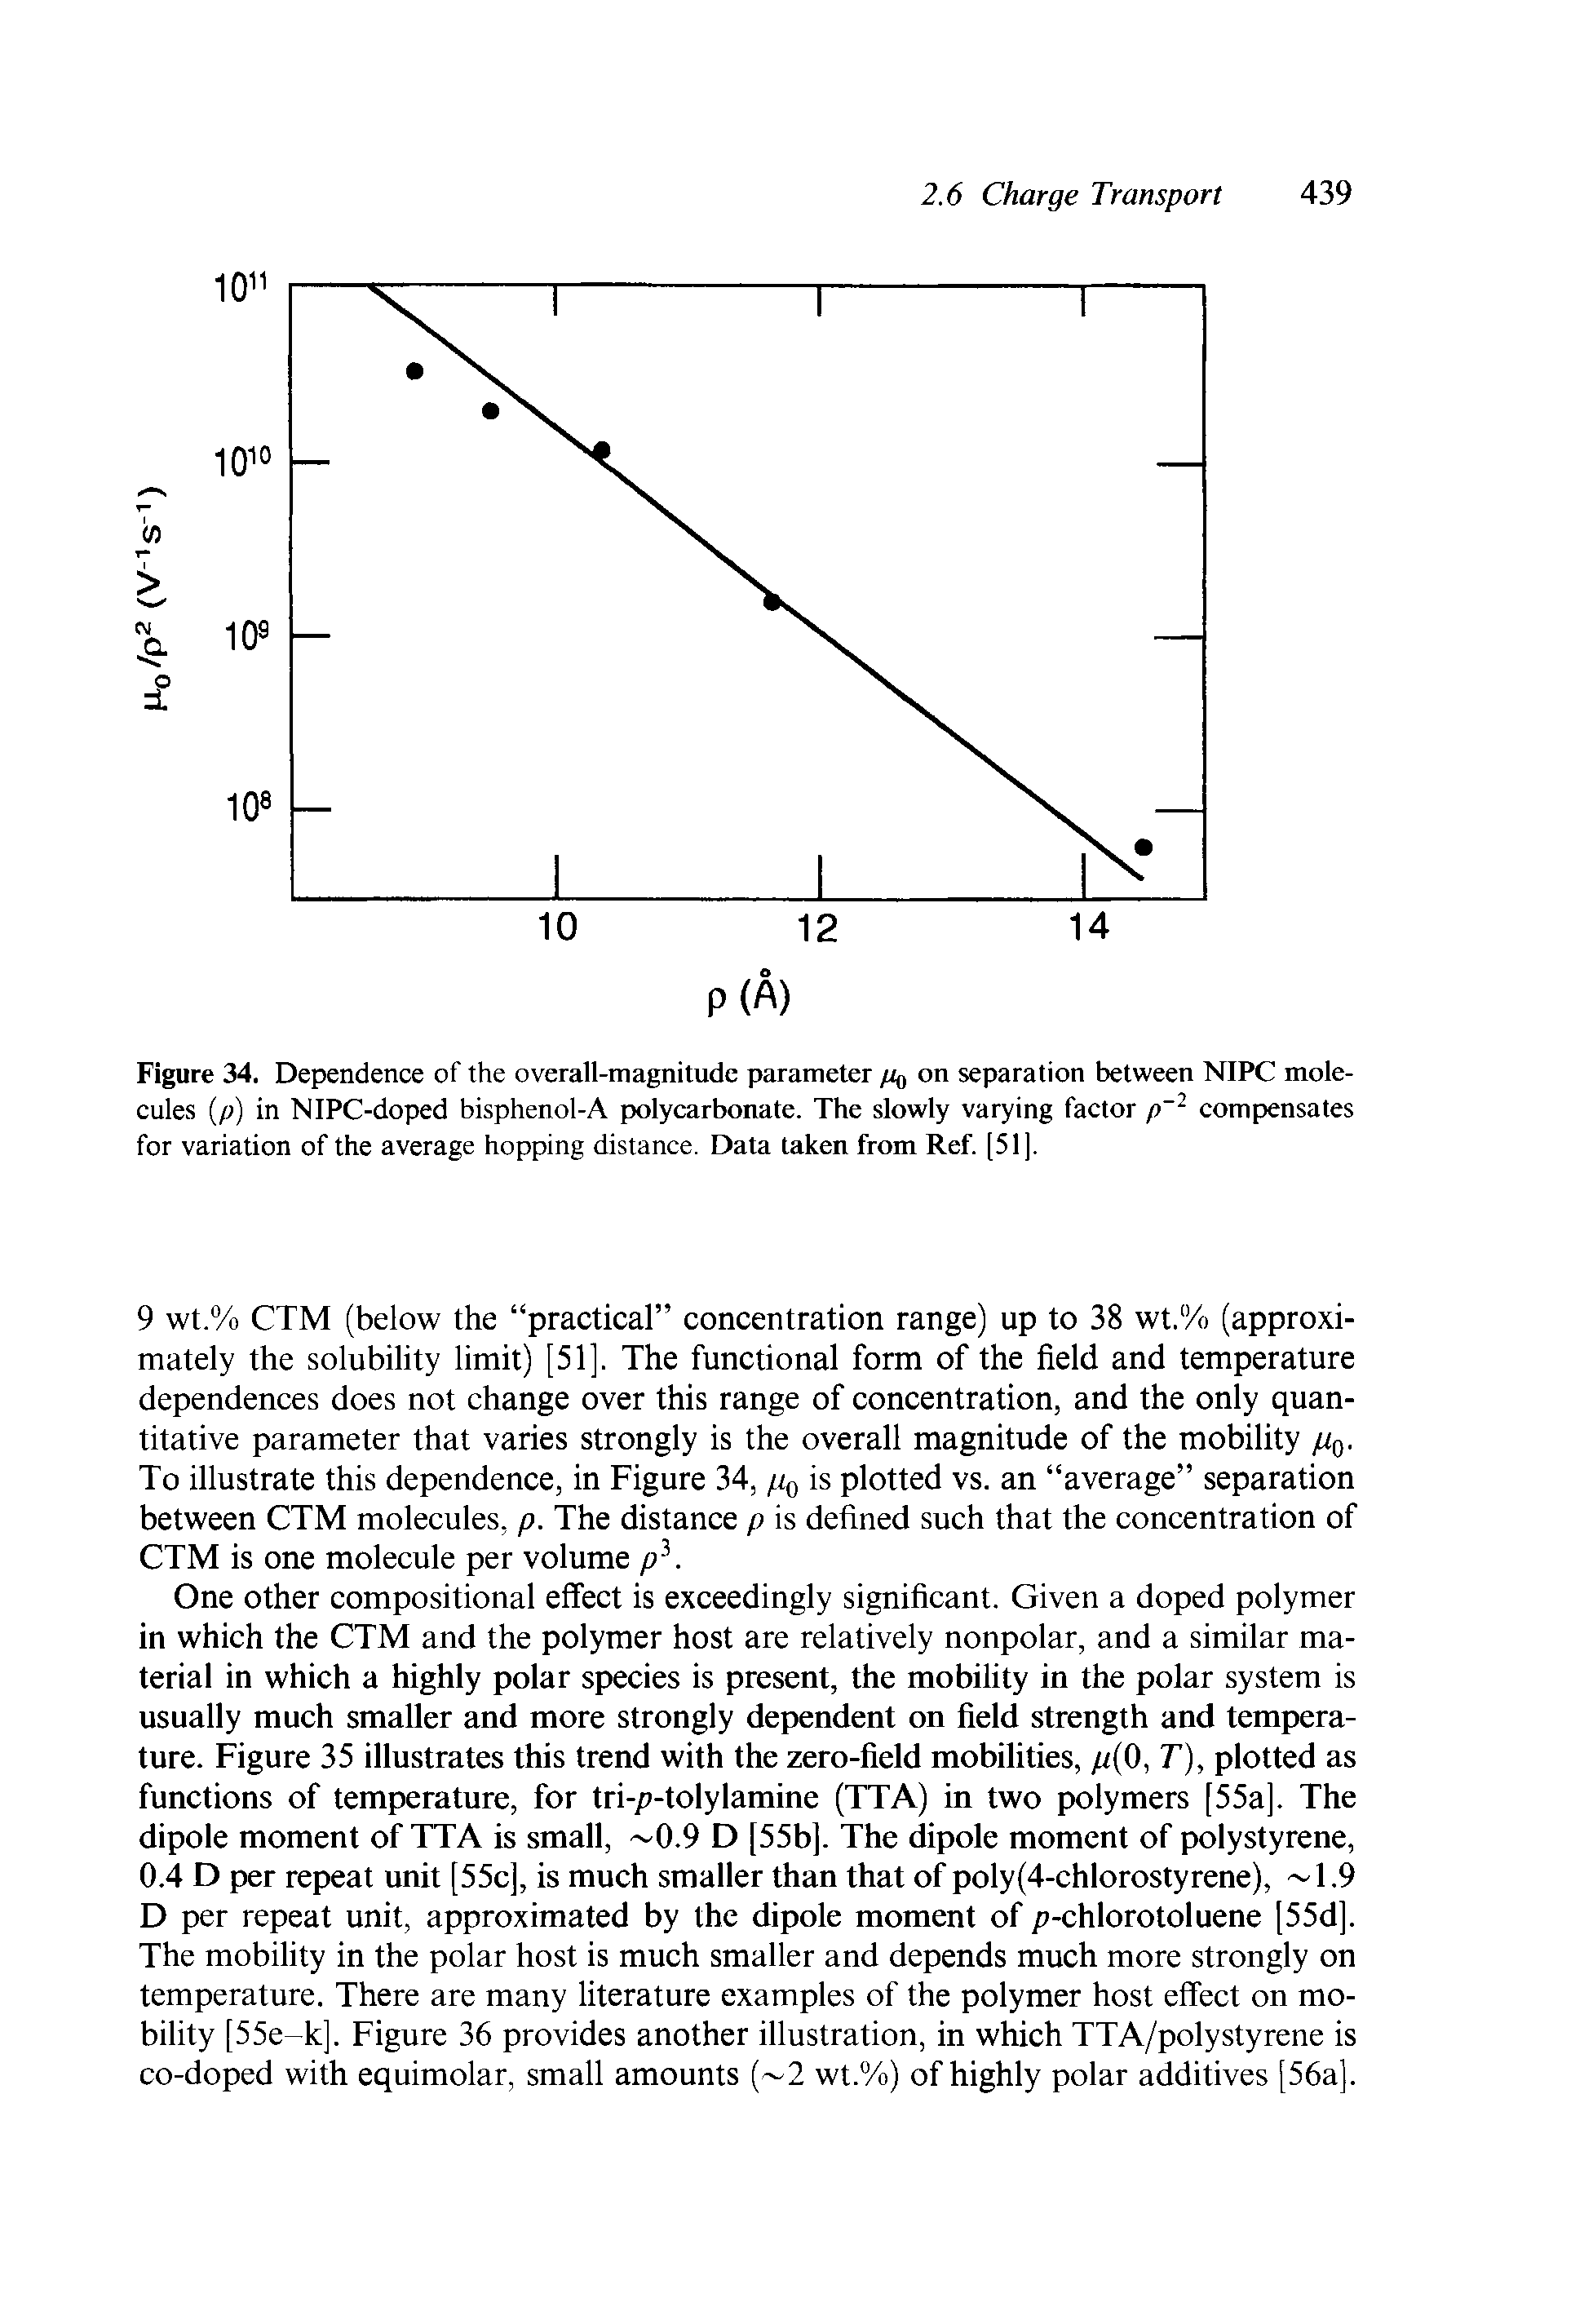 Figure 34. Dependence of the overall-magnitude parameter on separation between NIPC molecules (p) in NIPC-doped bisphenol-A pwlycarbonate. The slowly varying factor compensates for variation of the average hopping distance. Data taken from Ref. [51].